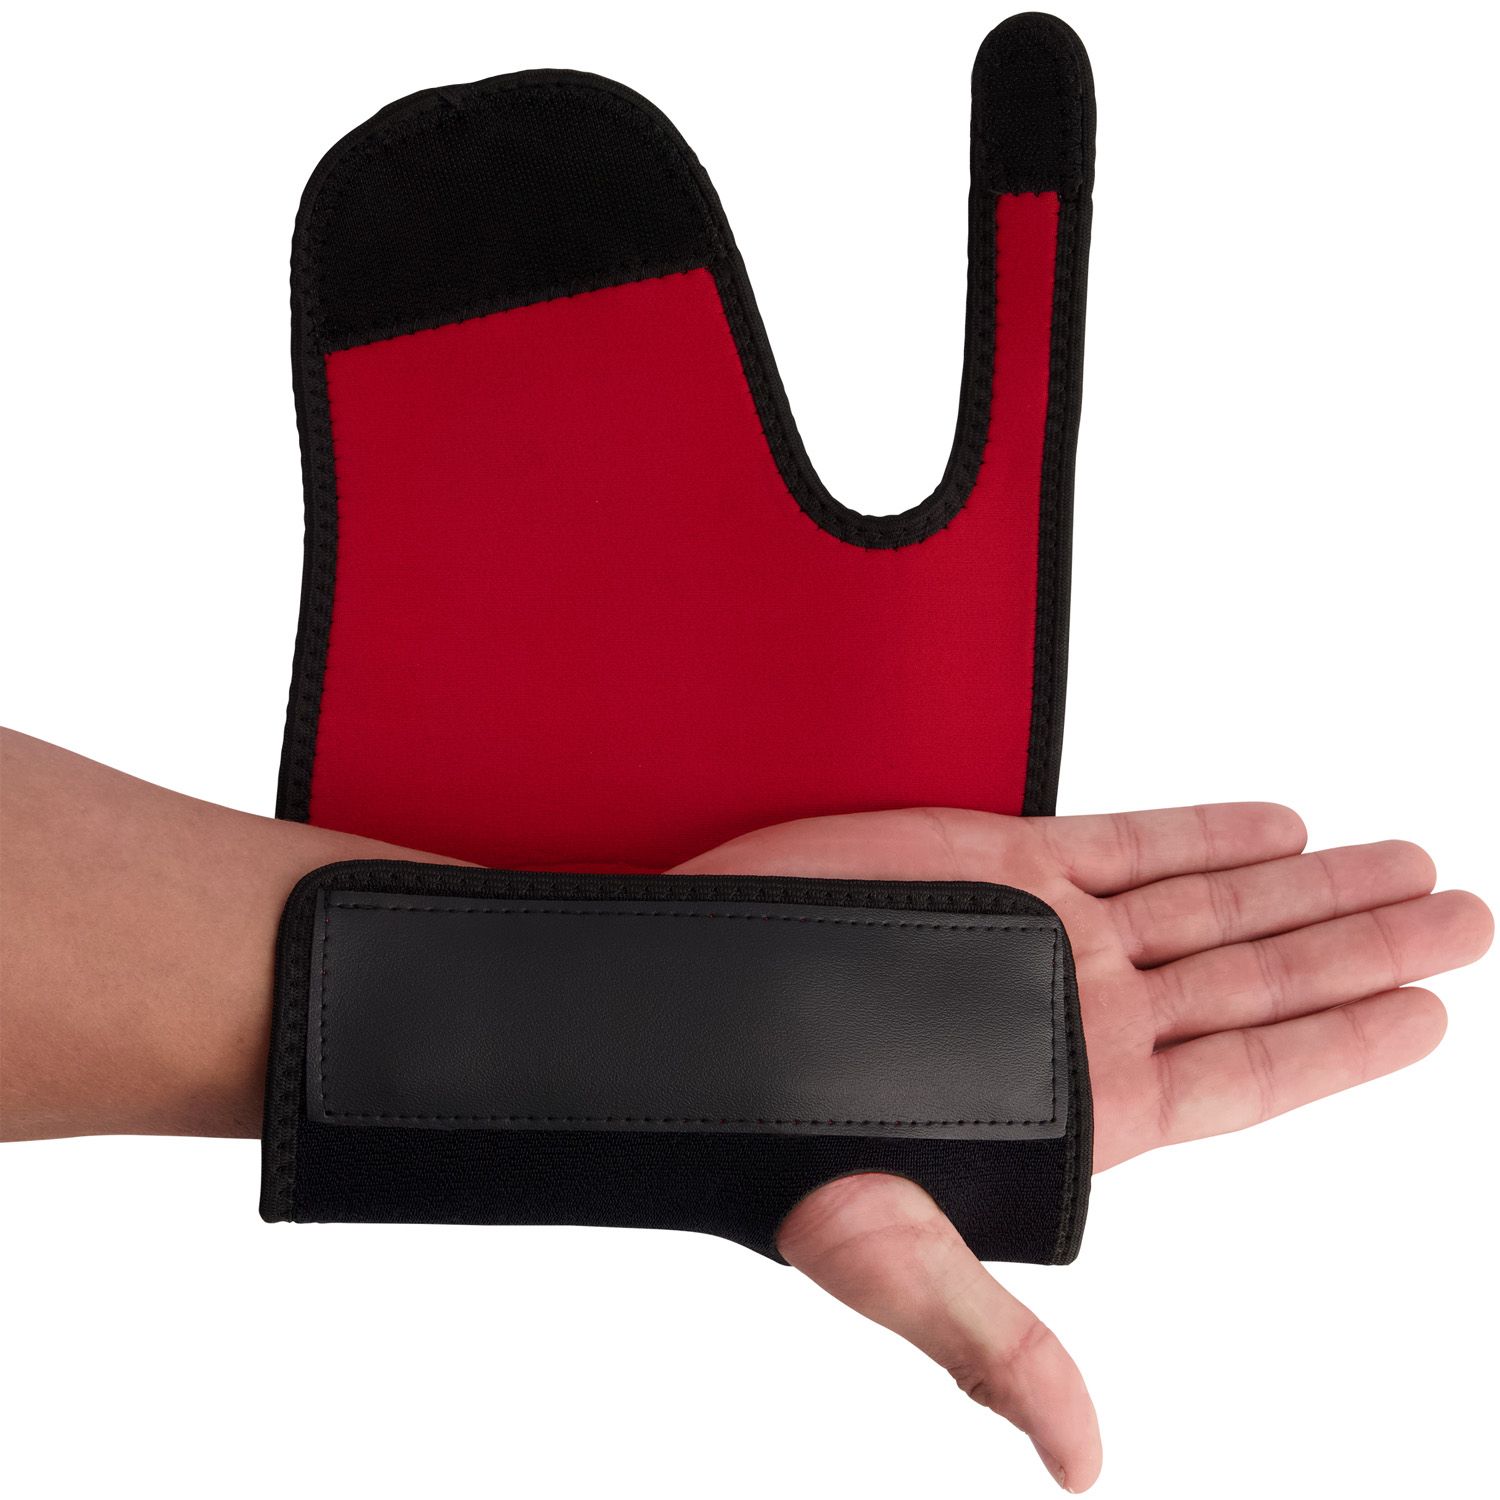 dunimed carpal tunnel syndrome wrist support product information